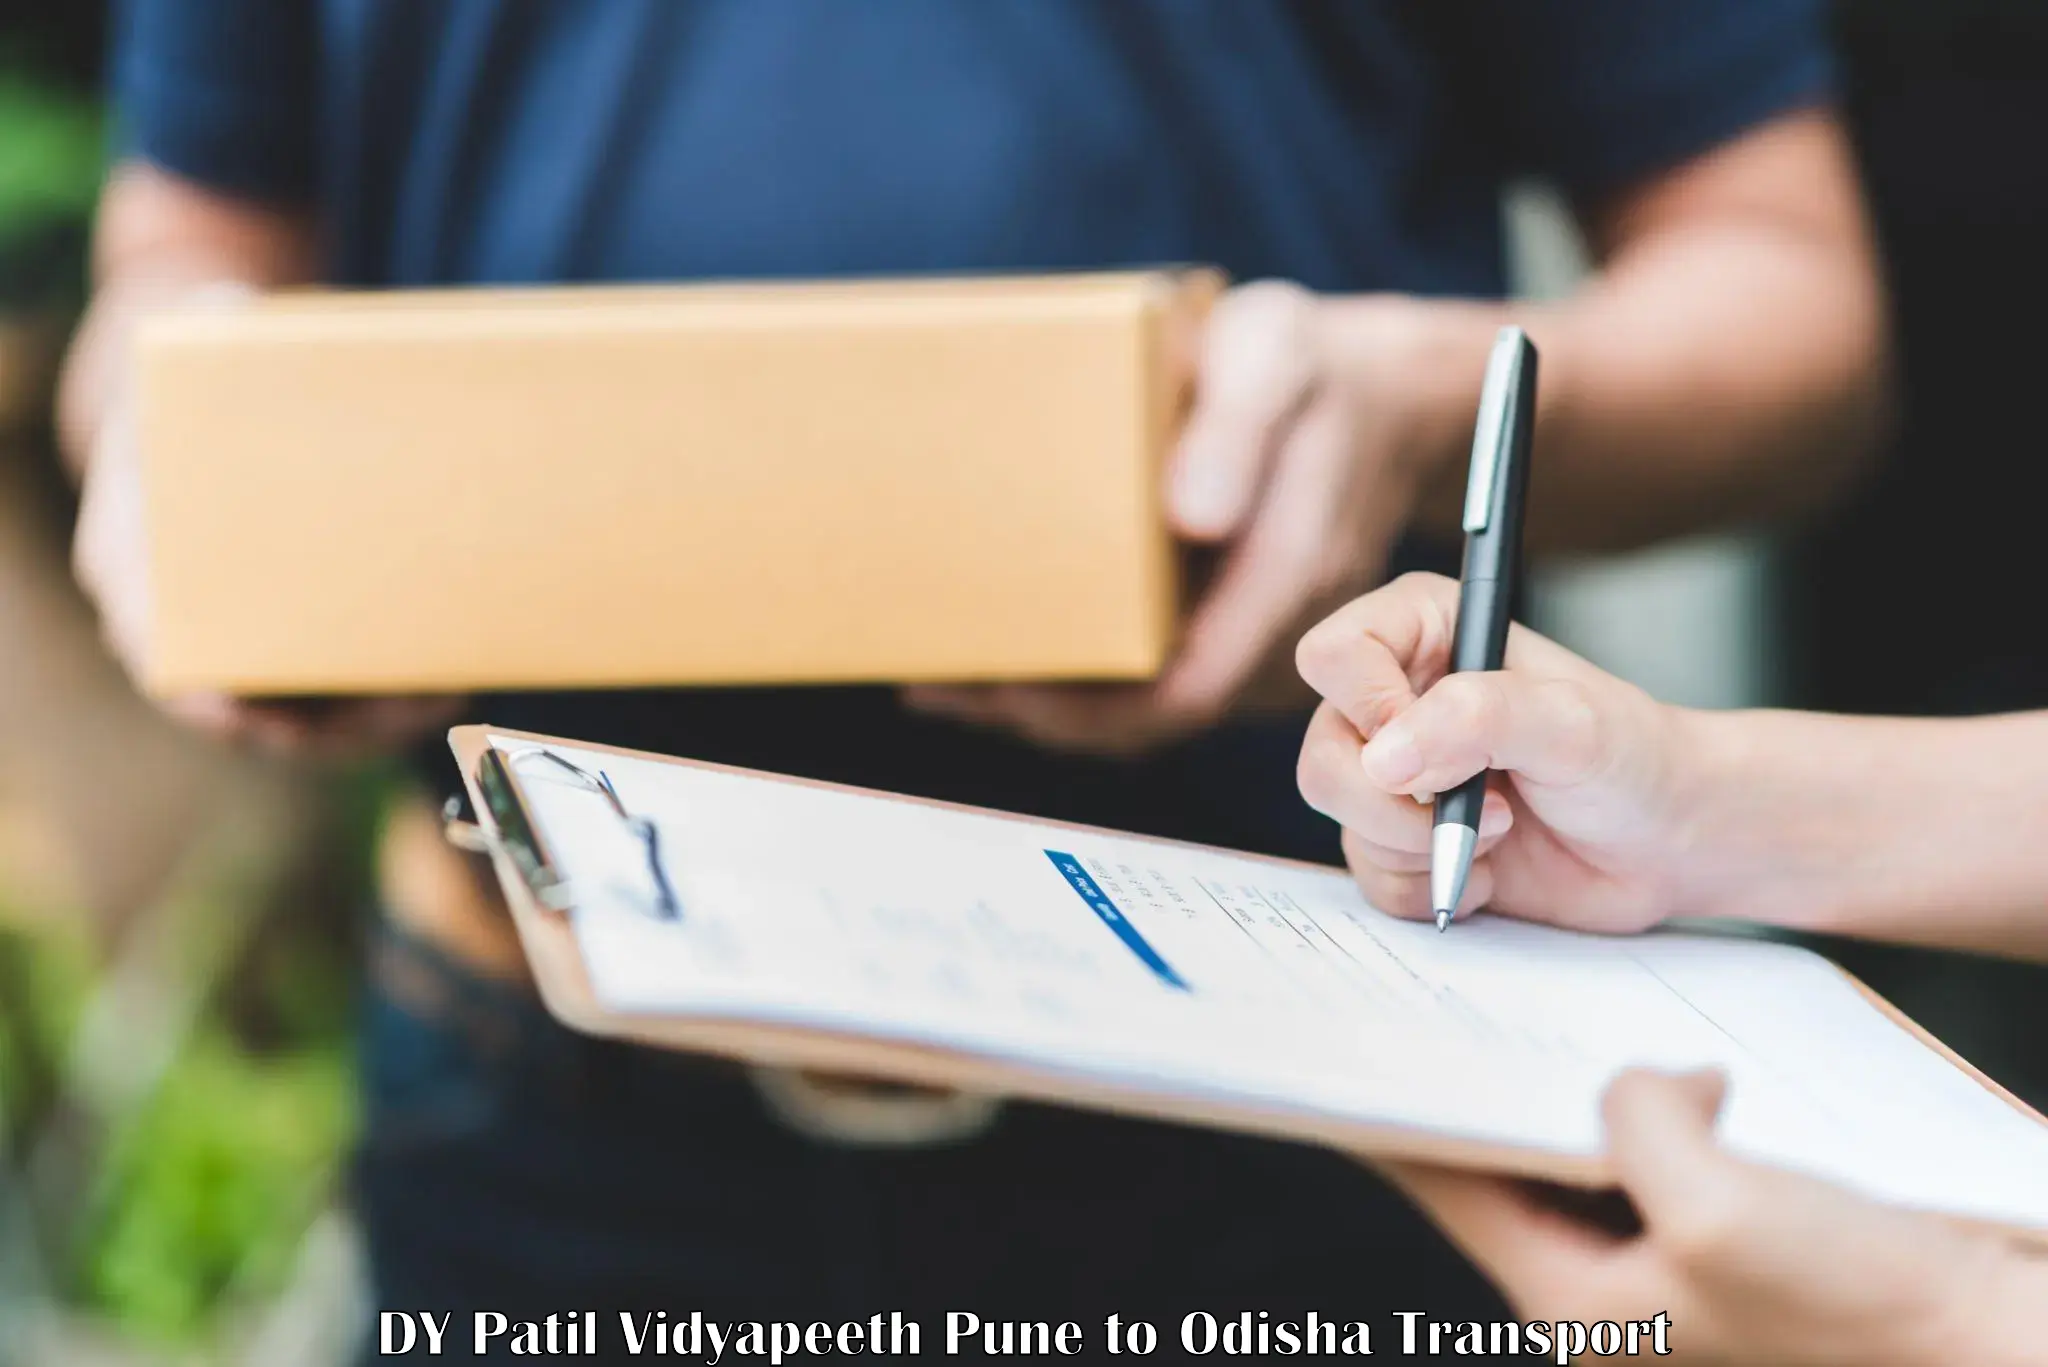 Goods transport services in DY Patil Vidyapeeth Pune to Sundergarh